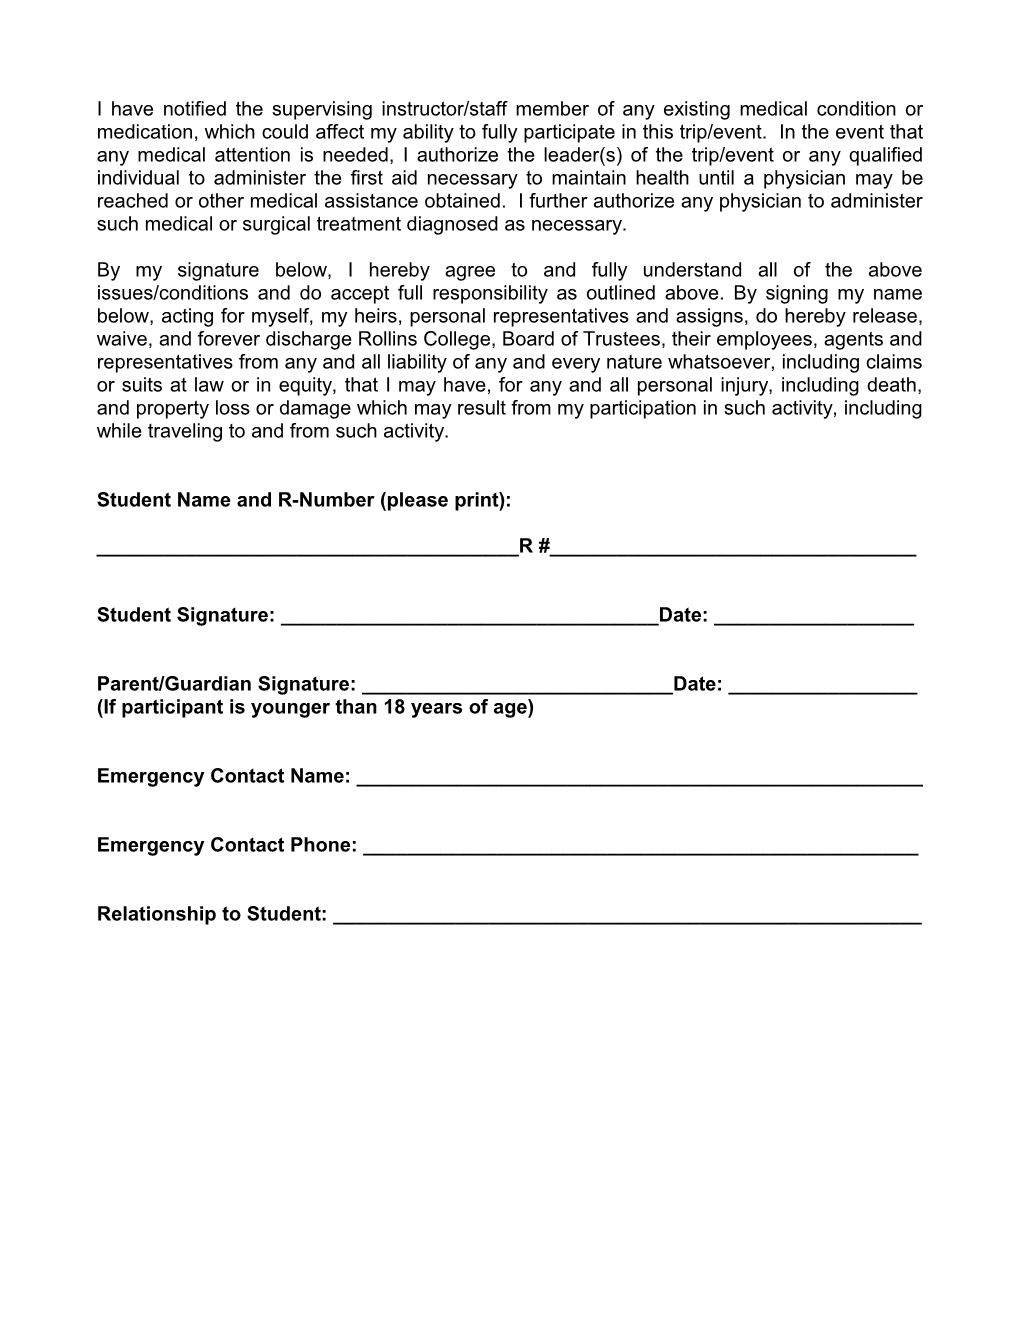 Travel/Event Informed Consent Form